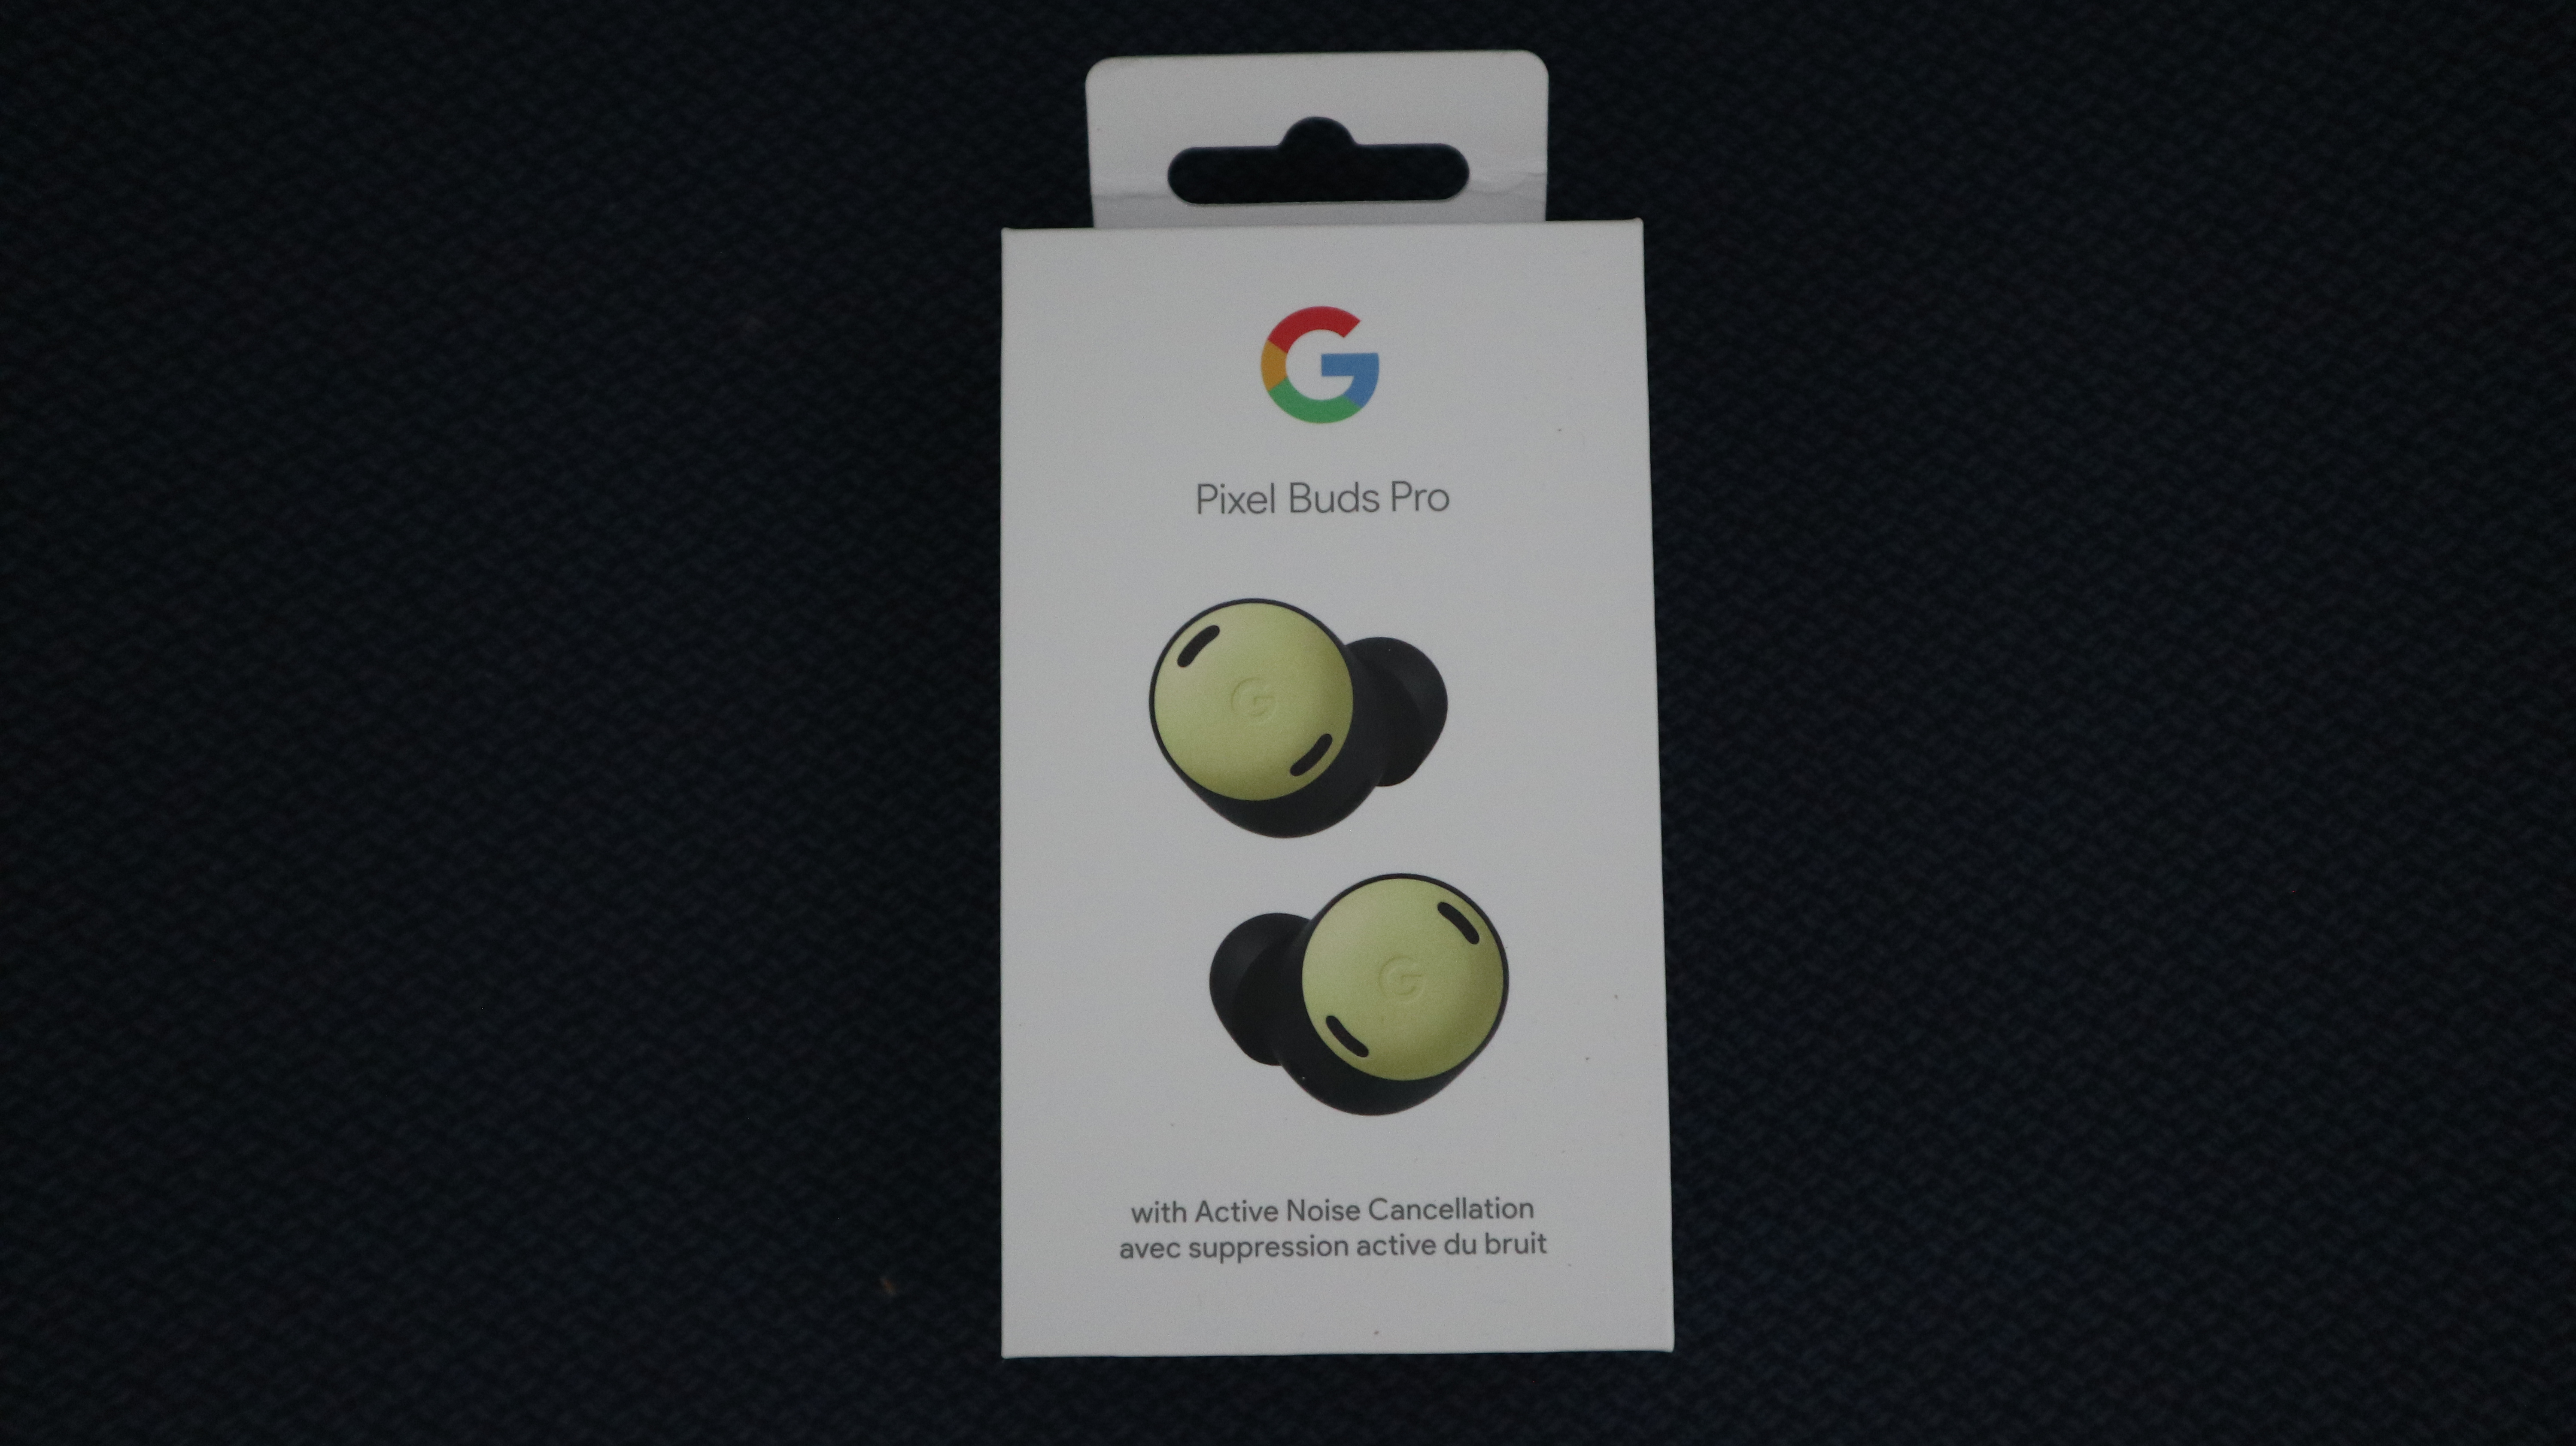 Google's $200 Pixel Buds Pro Have Active Noise Cancellation